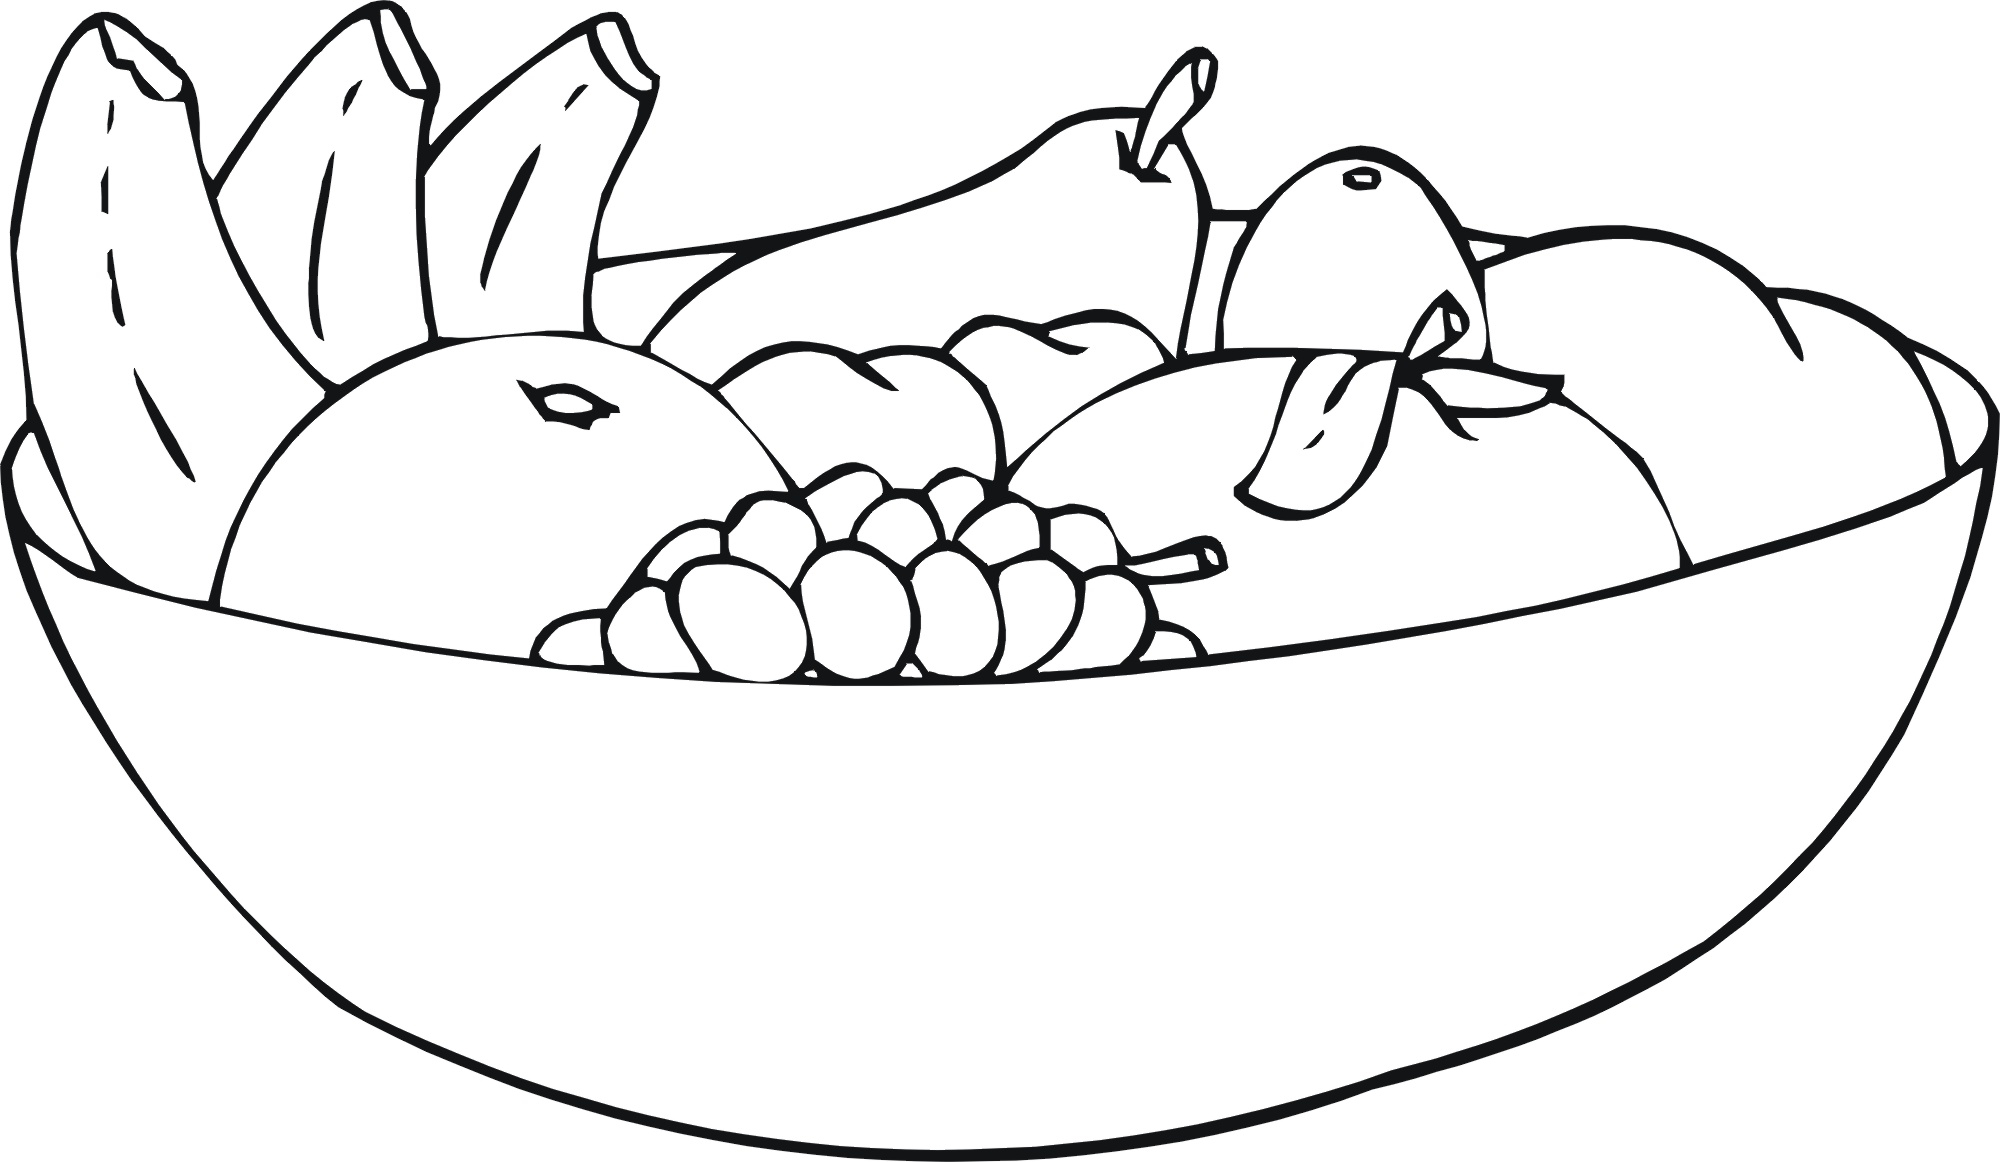 Printable Apple Coloring Pages Food Coloring Pages Apple Happy Printables Best Free Coloring